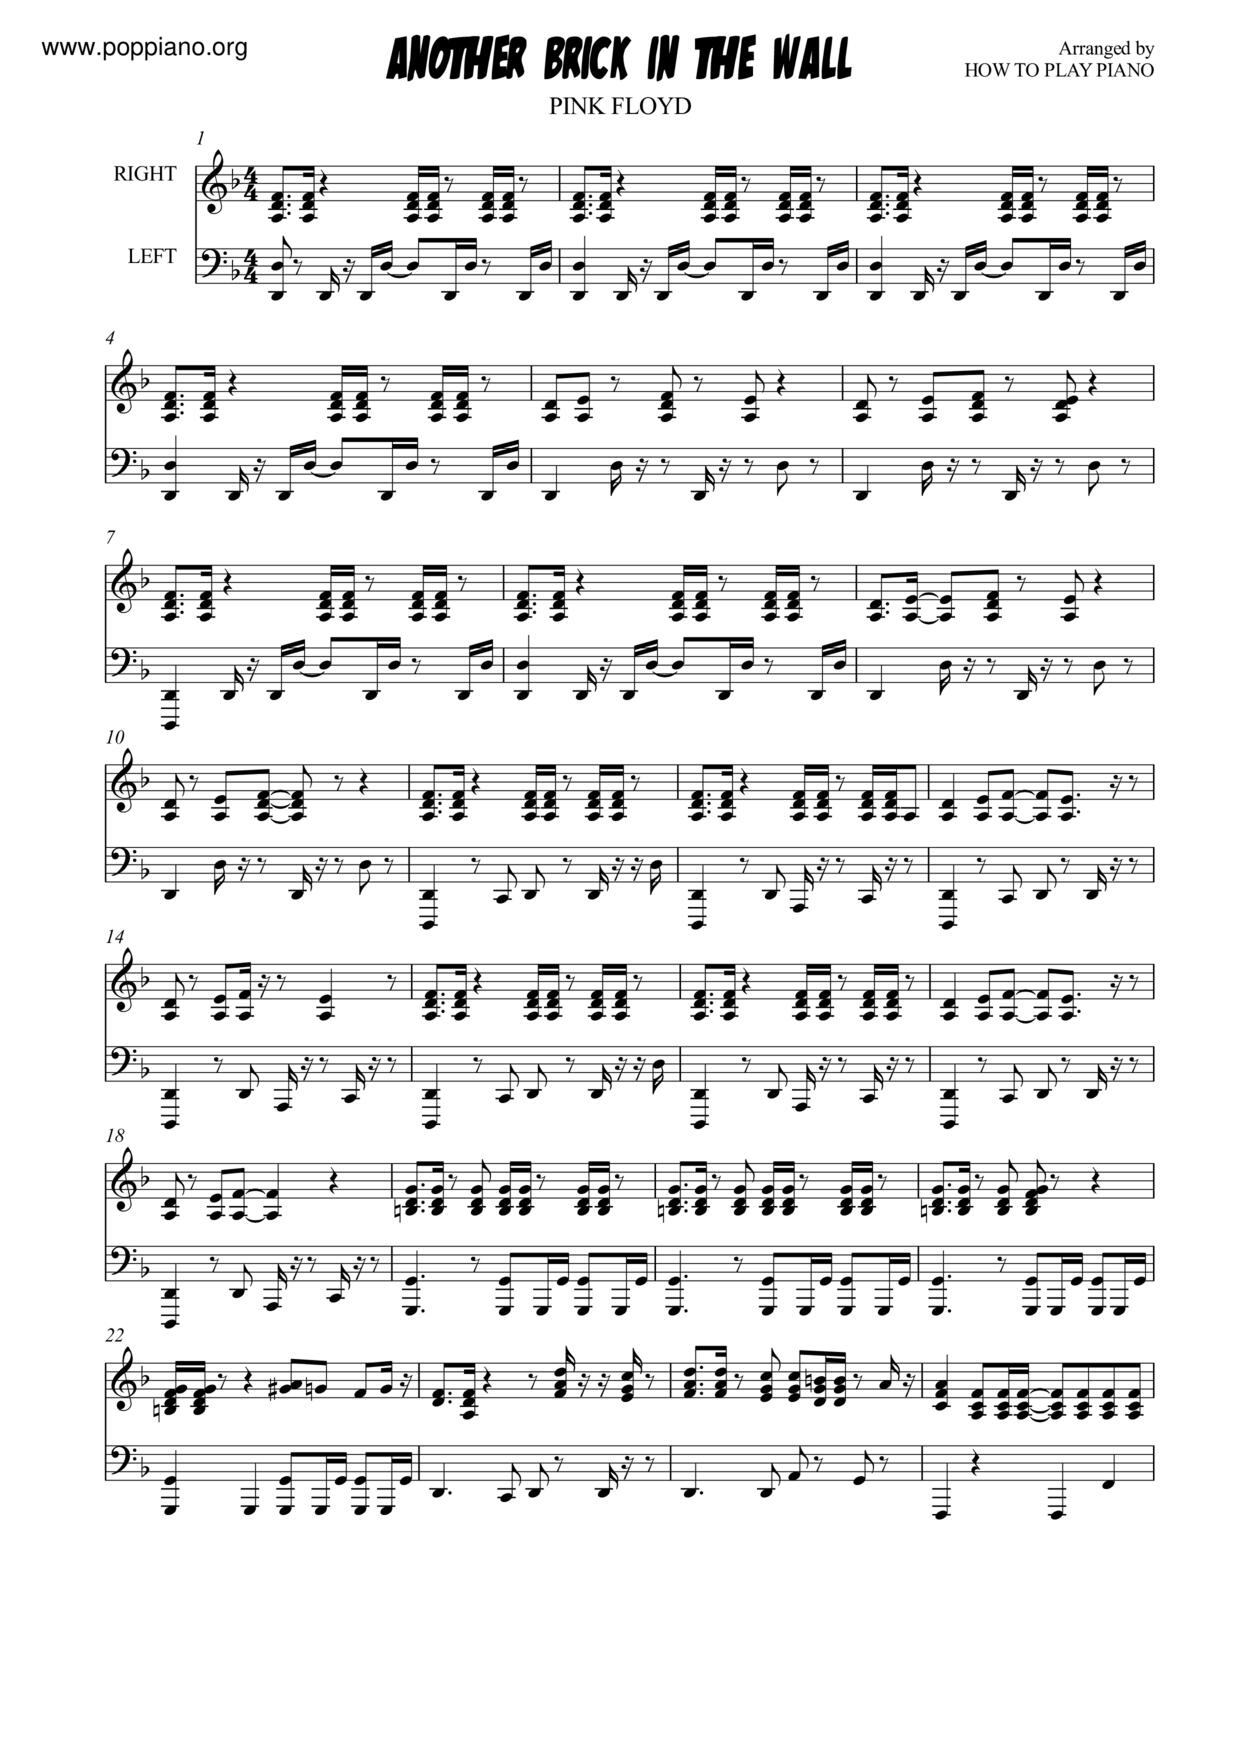 Another Brick in The Wall, Part 2 (Easy Level) (Pink Floyd) - Drums Sheet  Music